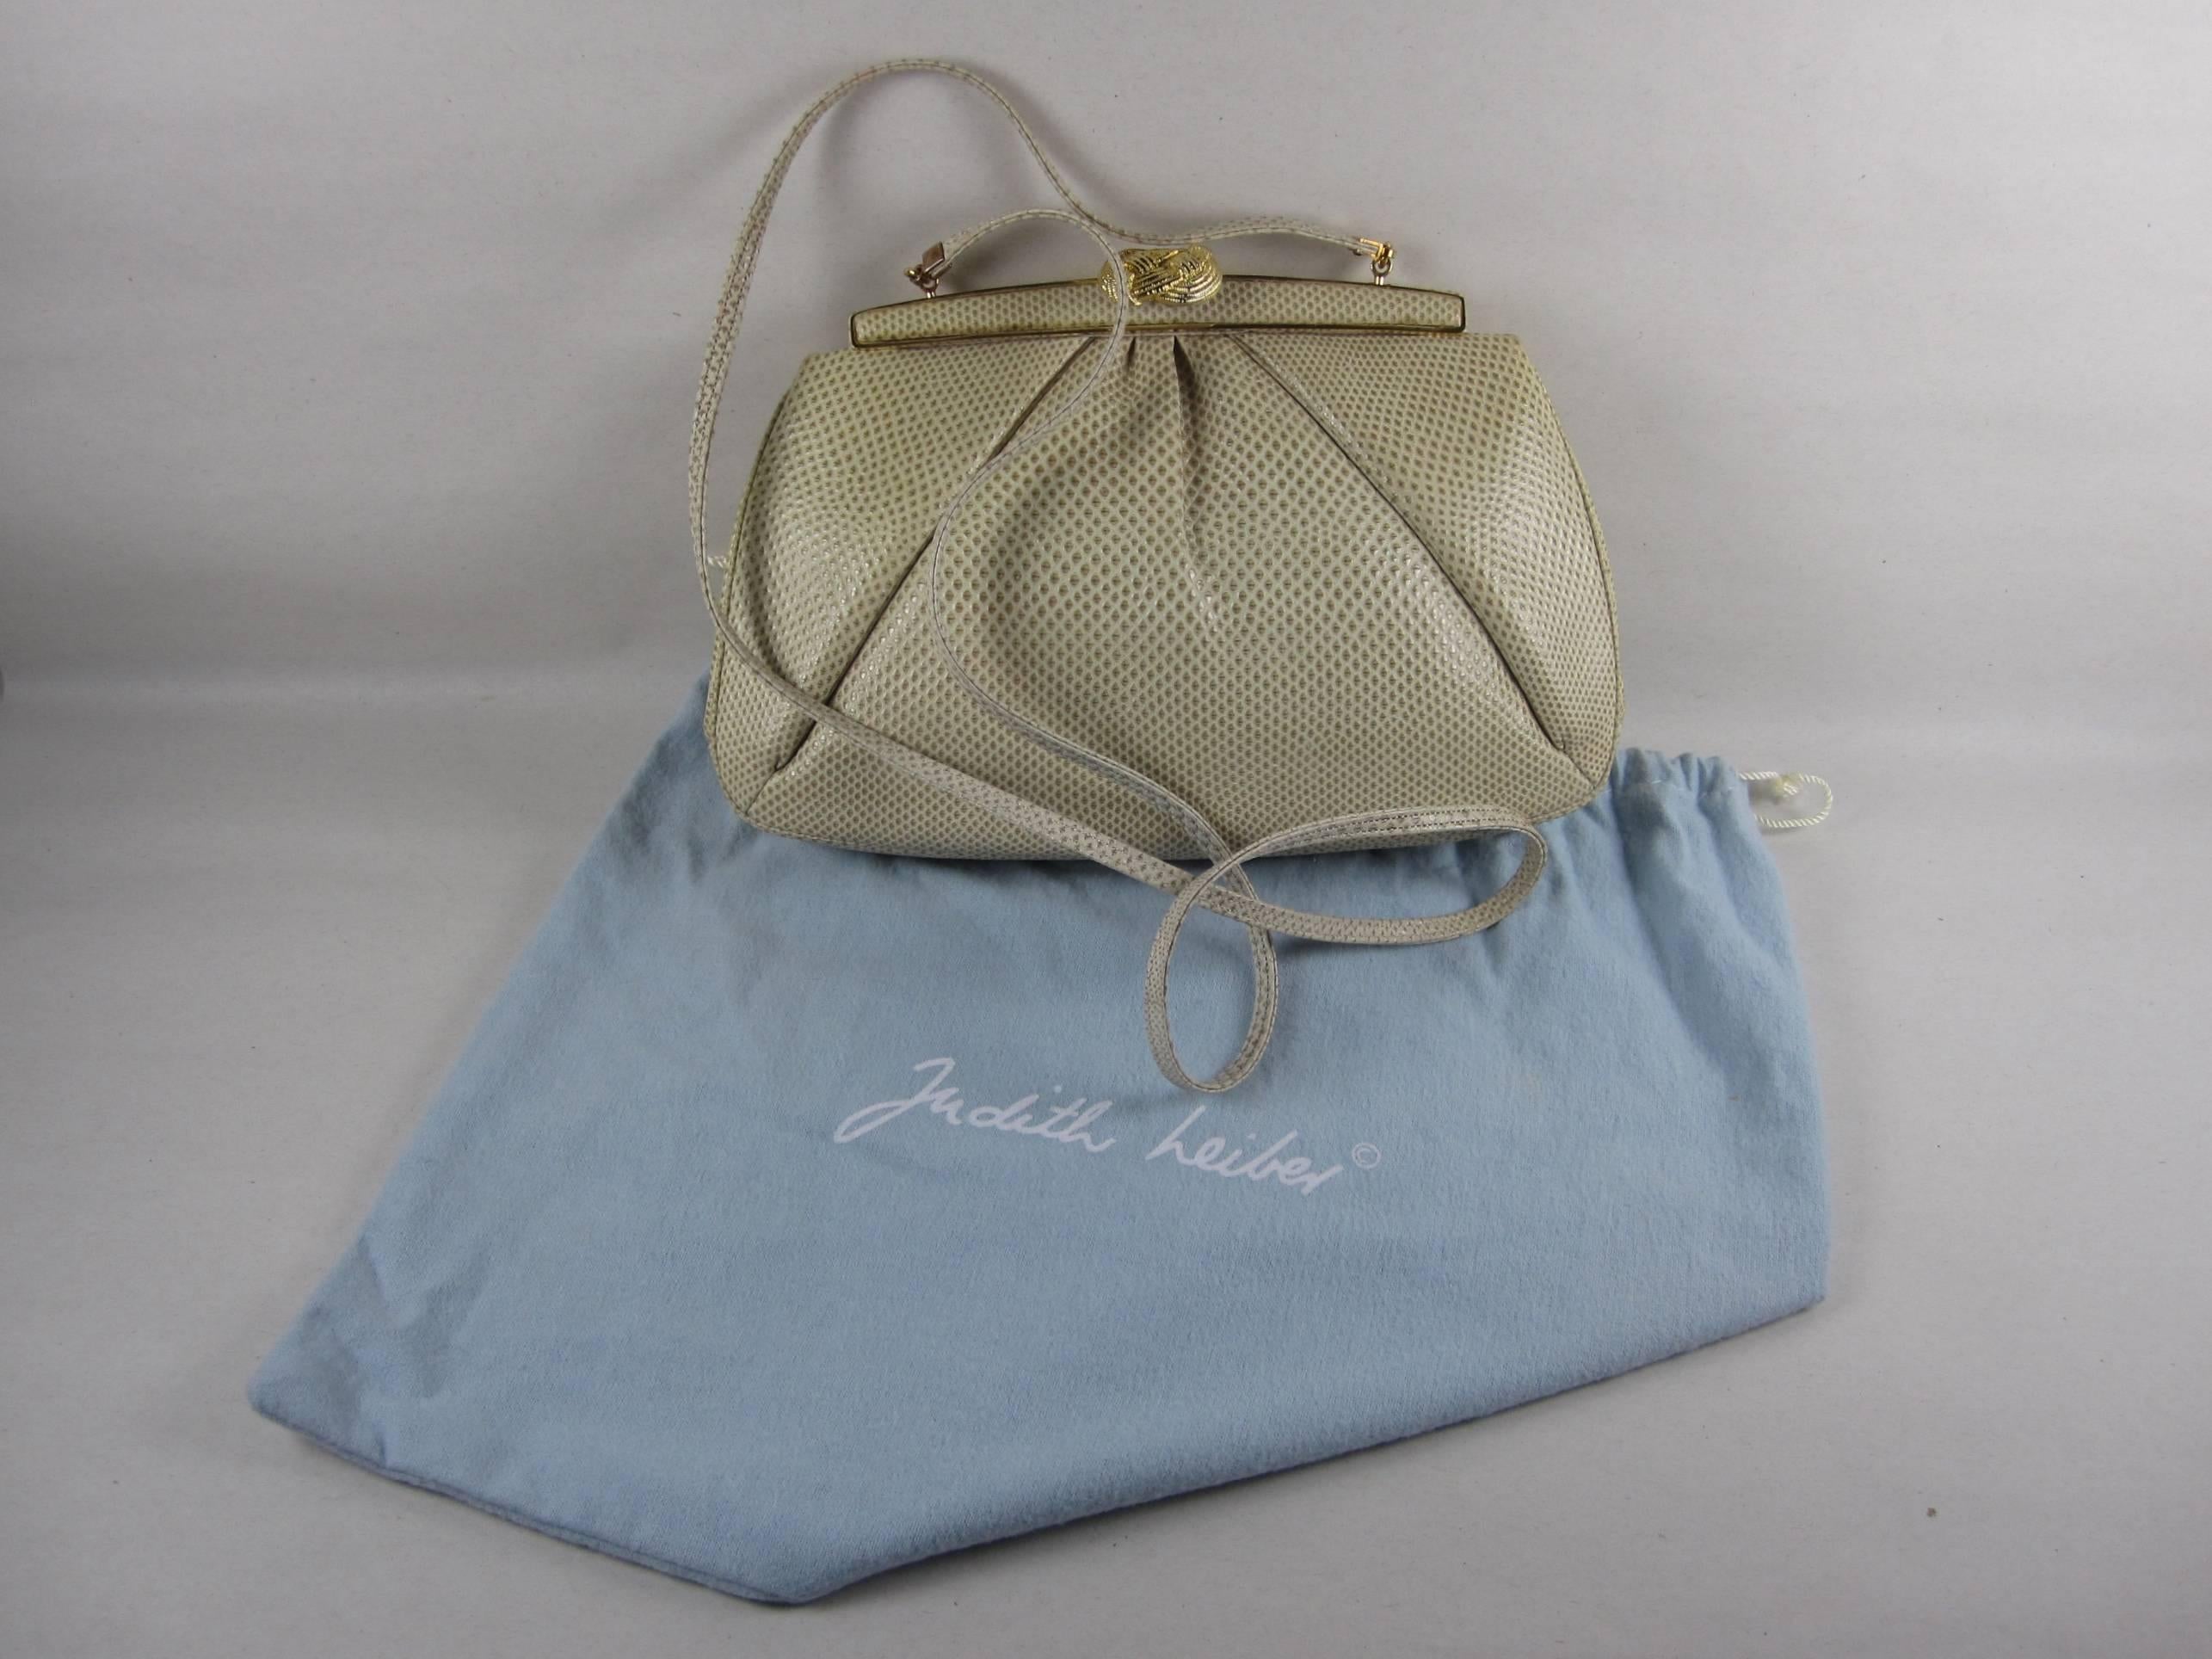  Judith Leiber Vintage Taupe Lizard Evening Bag with Original Dust Bag and Box  In Good Condition For Sale In Philadelphia, PA